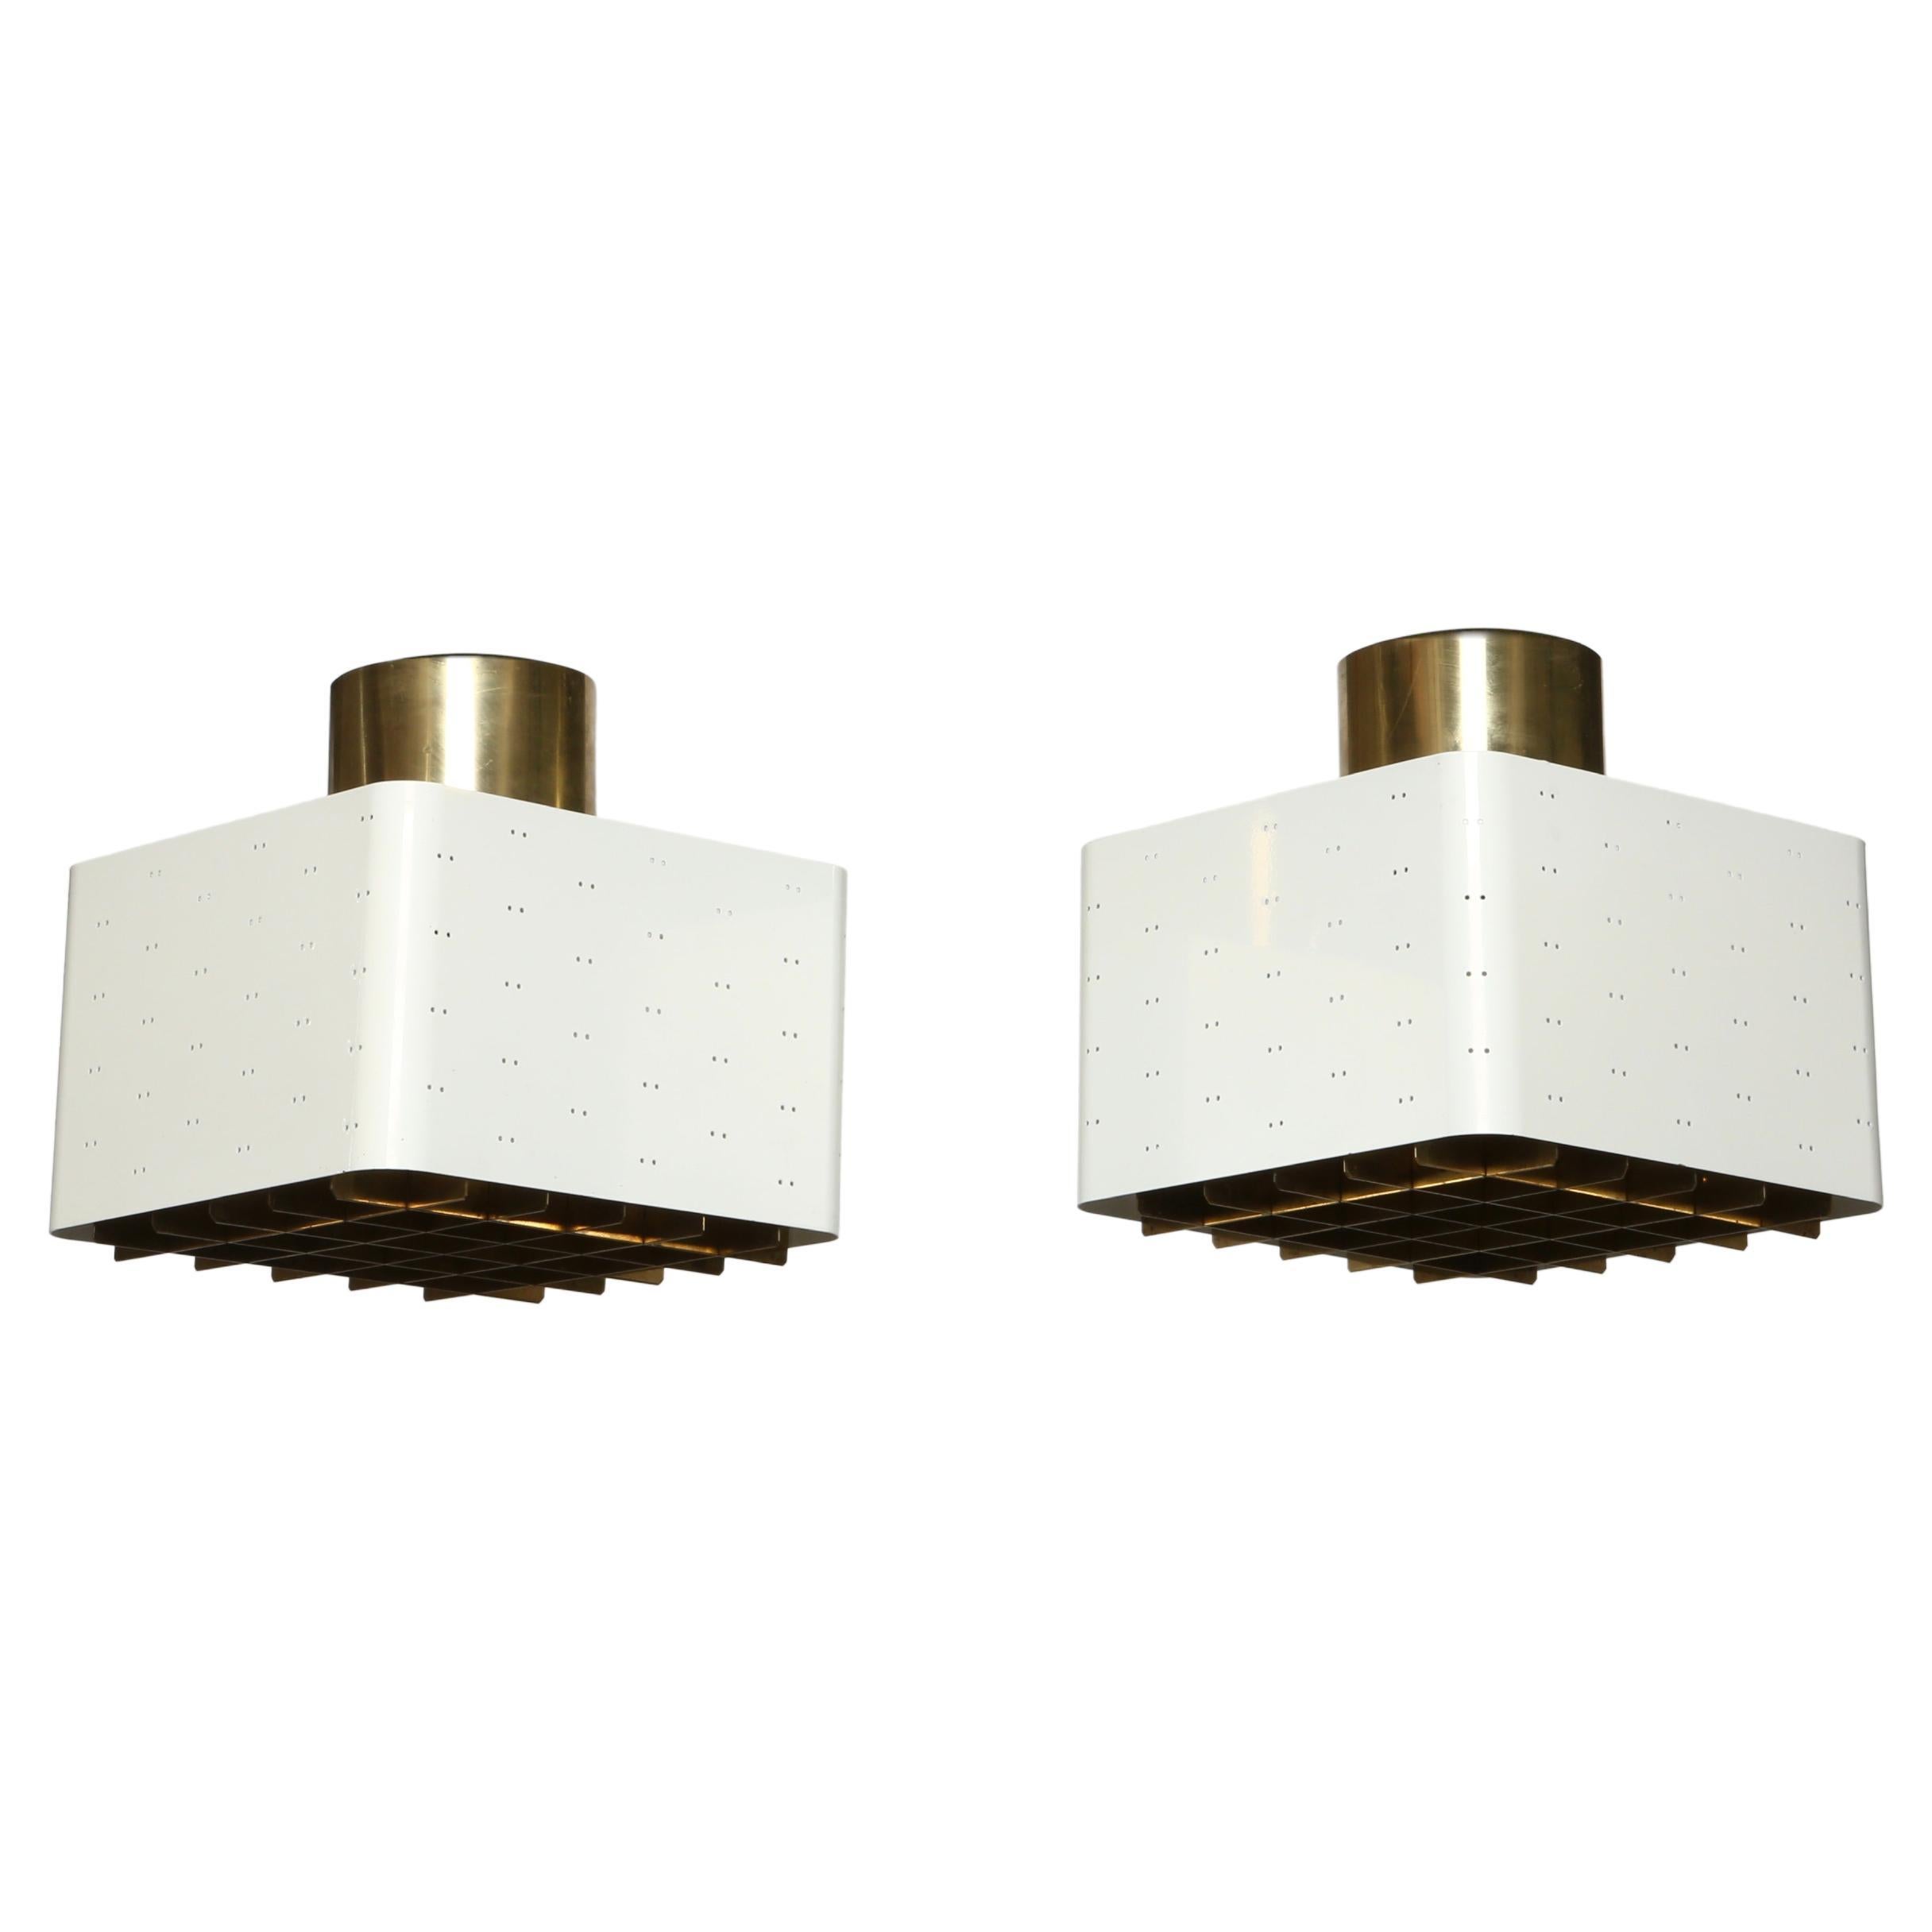  Paavo Tynell Starry Sky ceiling lights model 9068 set of 2